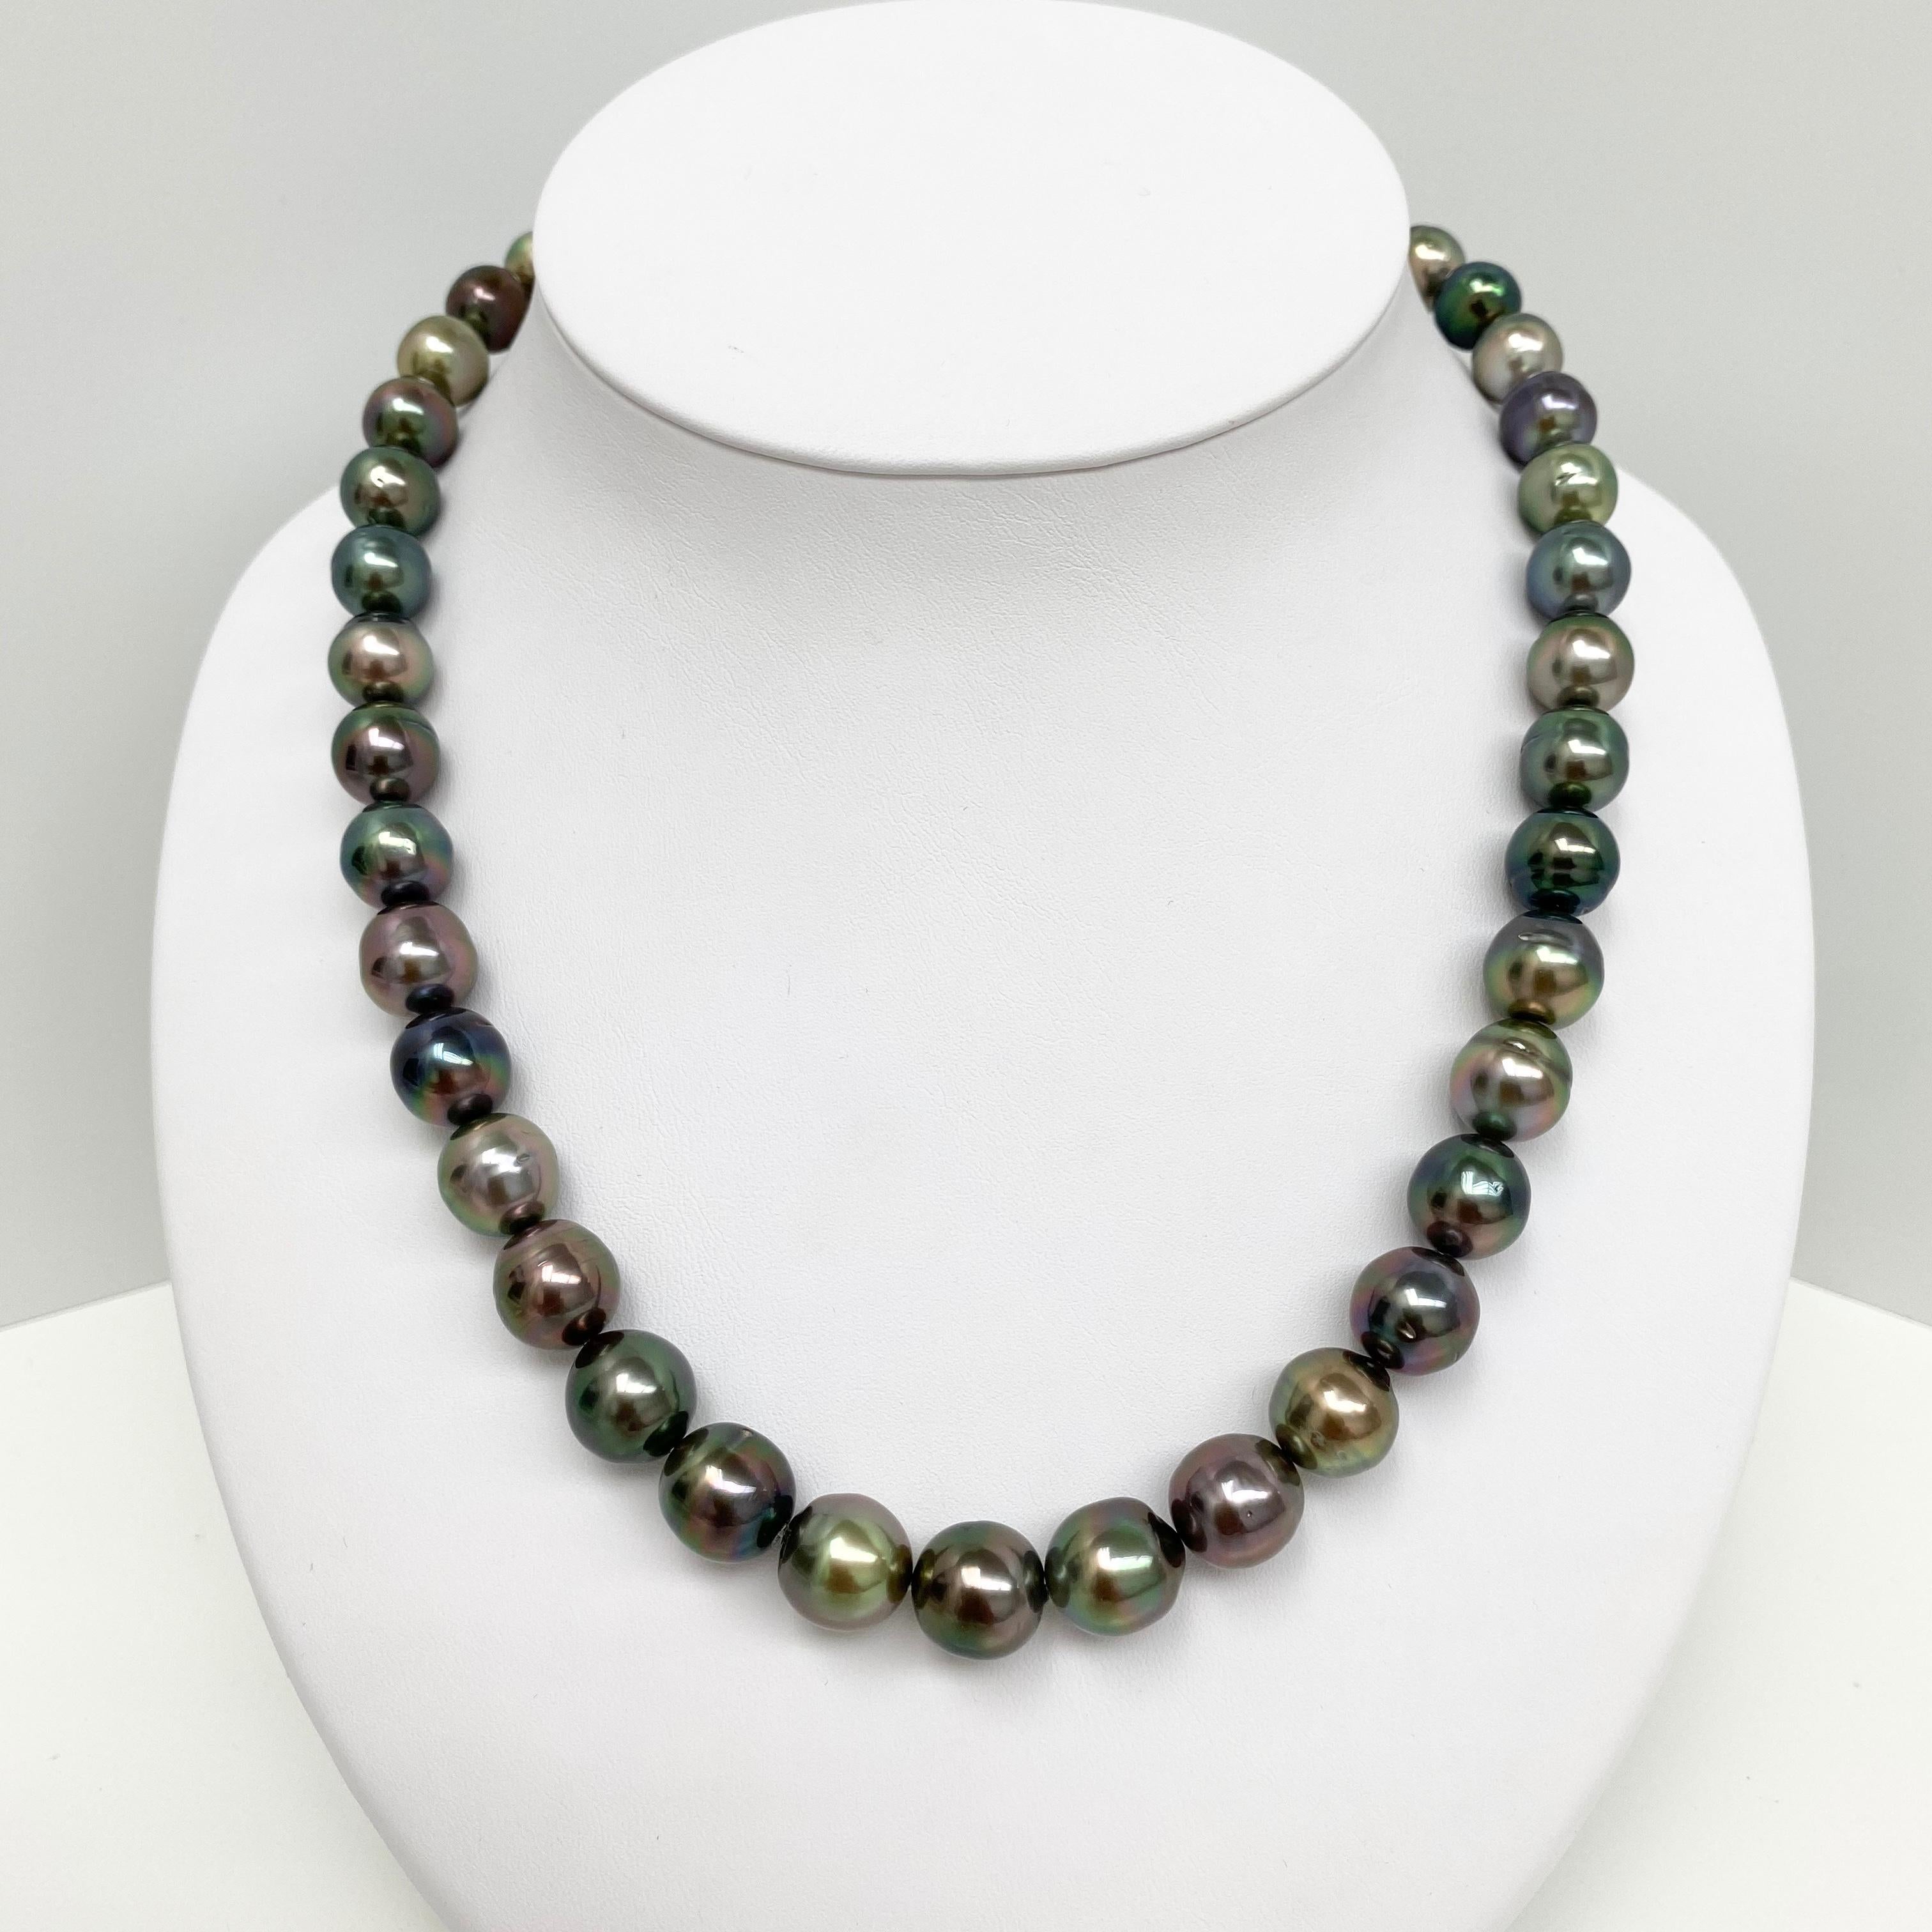 10-11mm Tahitian Multicolor Oval Pearl Necklace with Gold Clasp
AAA Quality, Tahitian Multicolor Peacock Oval Pearl Necklace, 18 inches hand-knotted with gold fish-hook clasp #CP100
